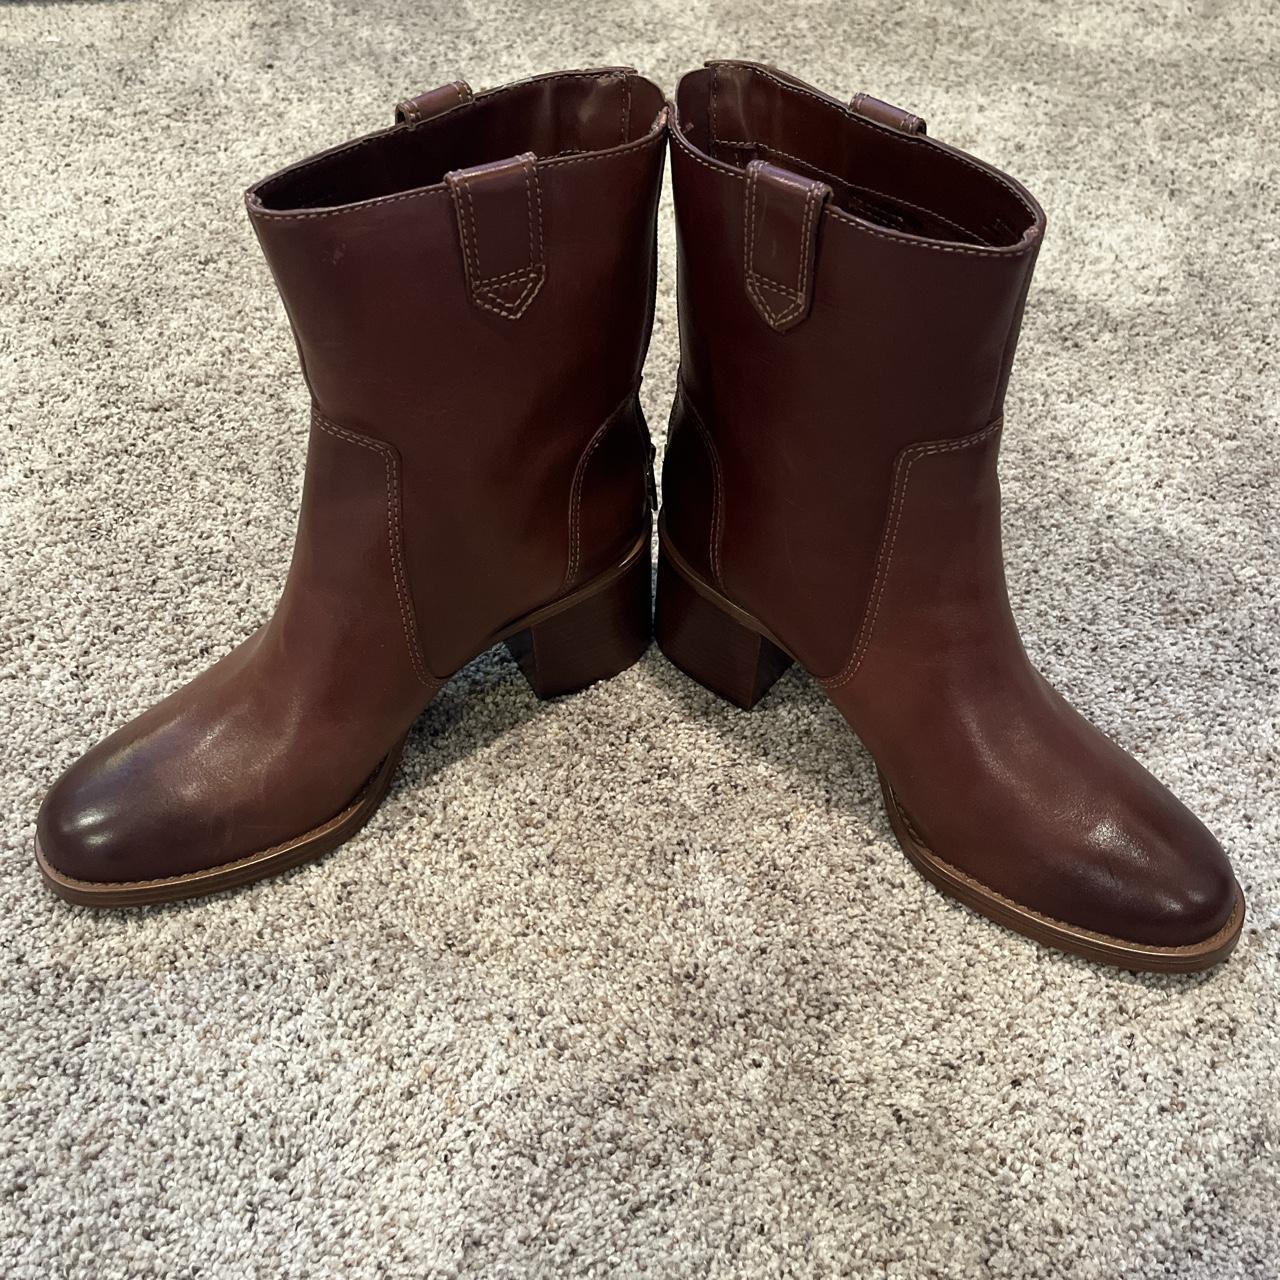 Vince Camuto Women's Burgundy Boots (3)